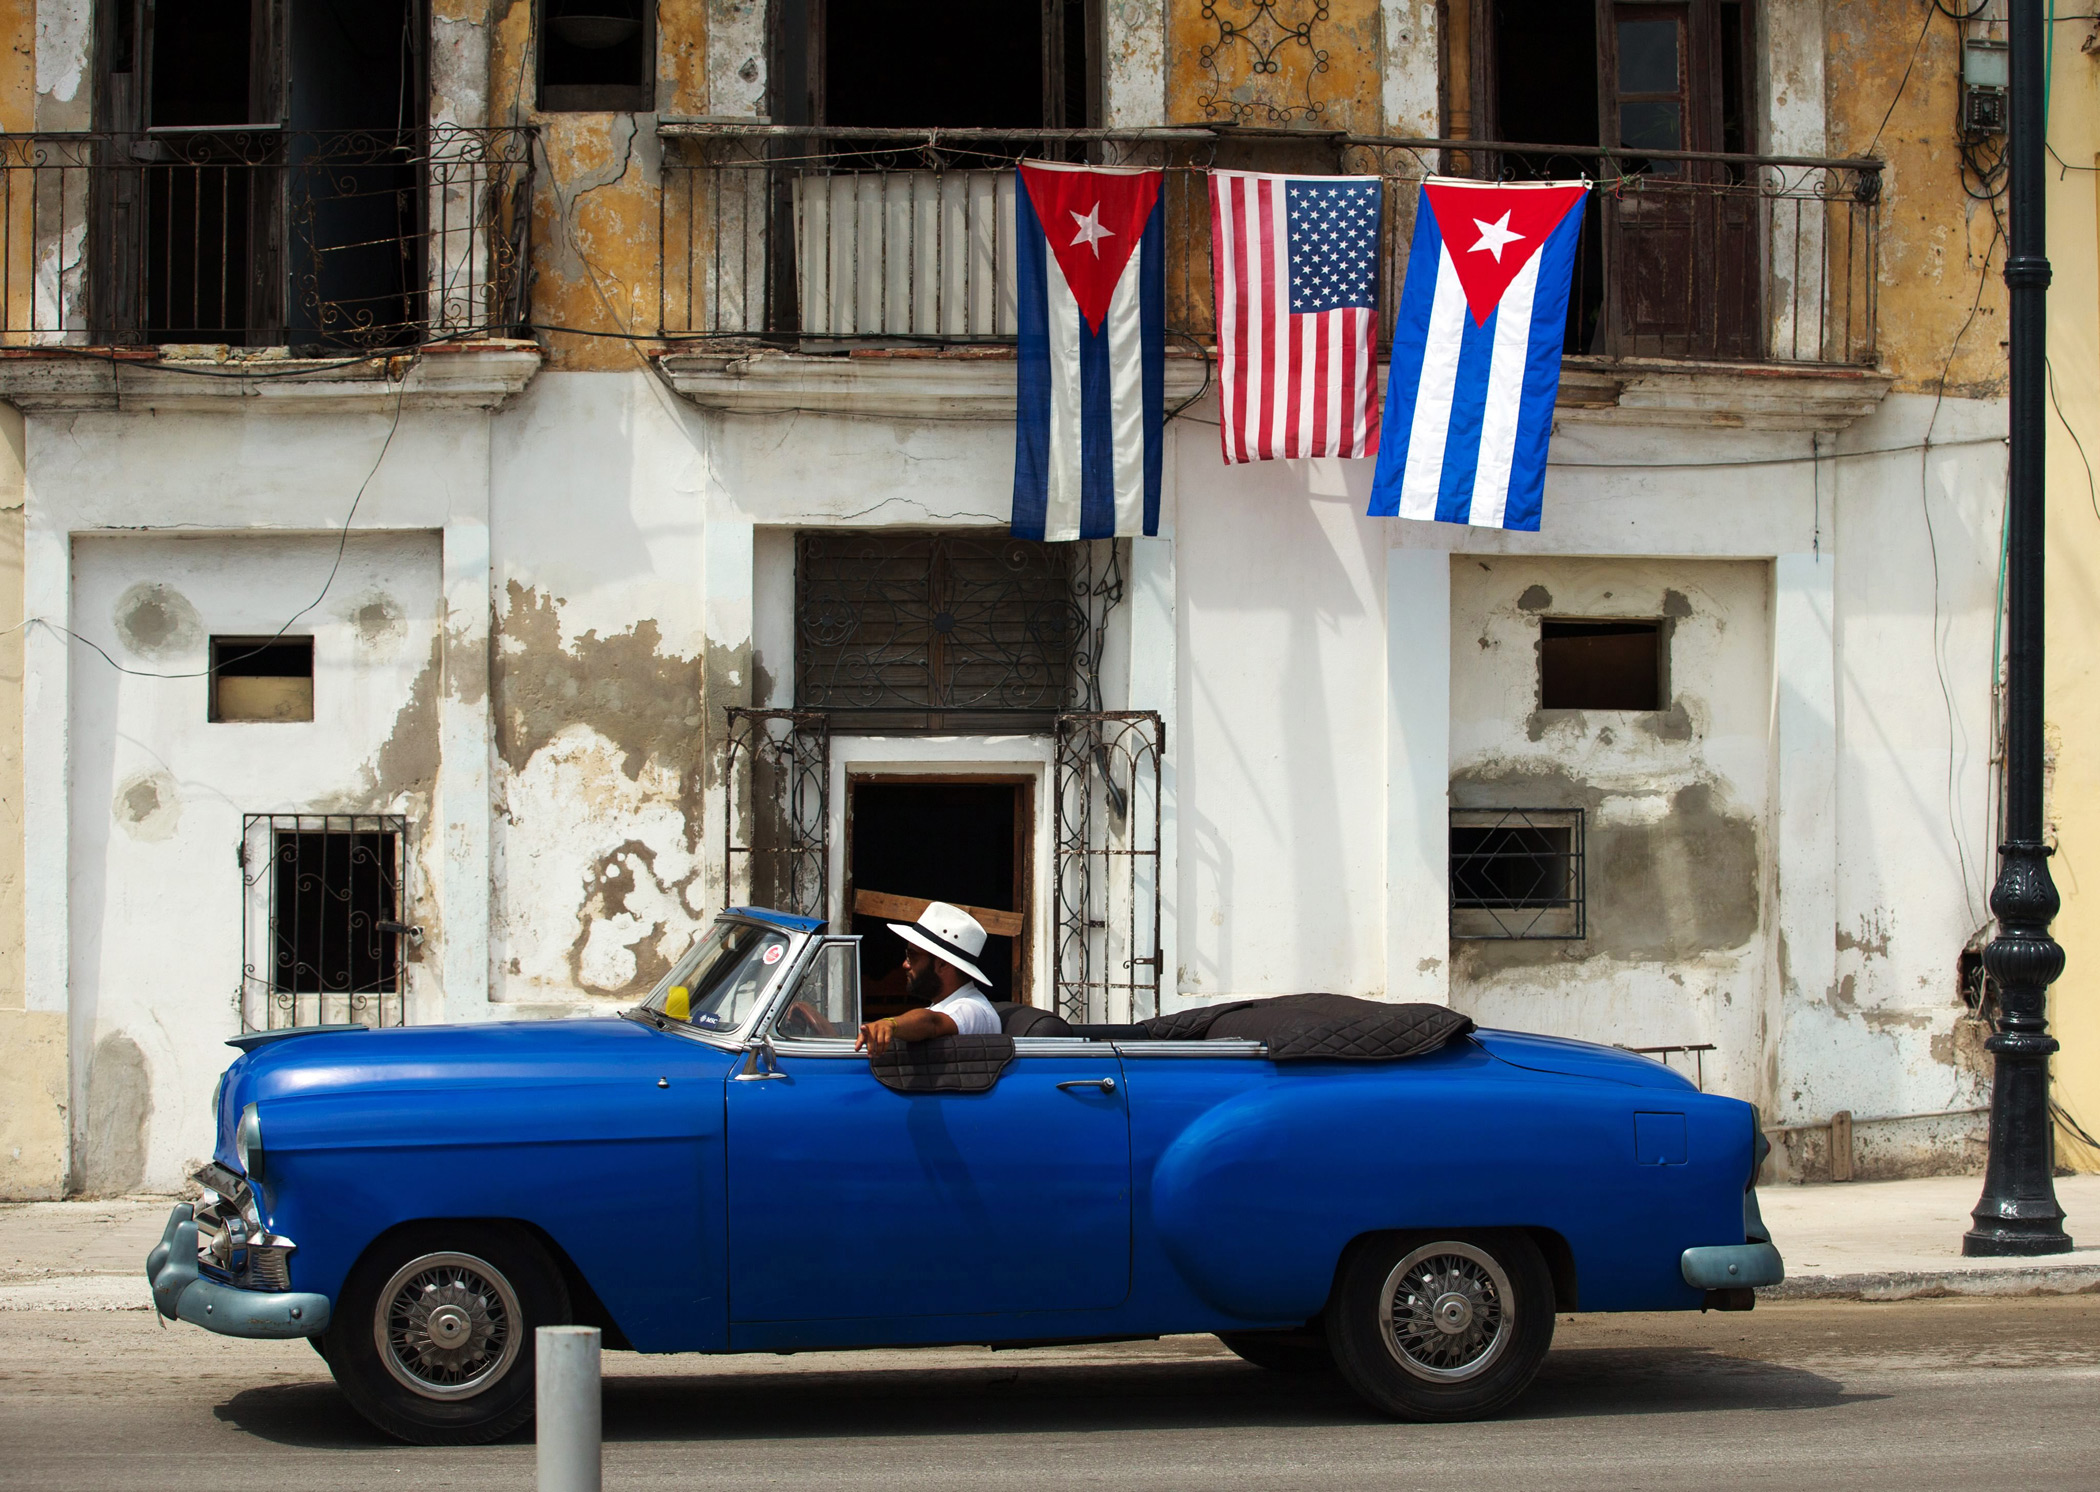 A car passes by a house decorated with the flags of the United States and Cuba in Havana, on March 20 2016.